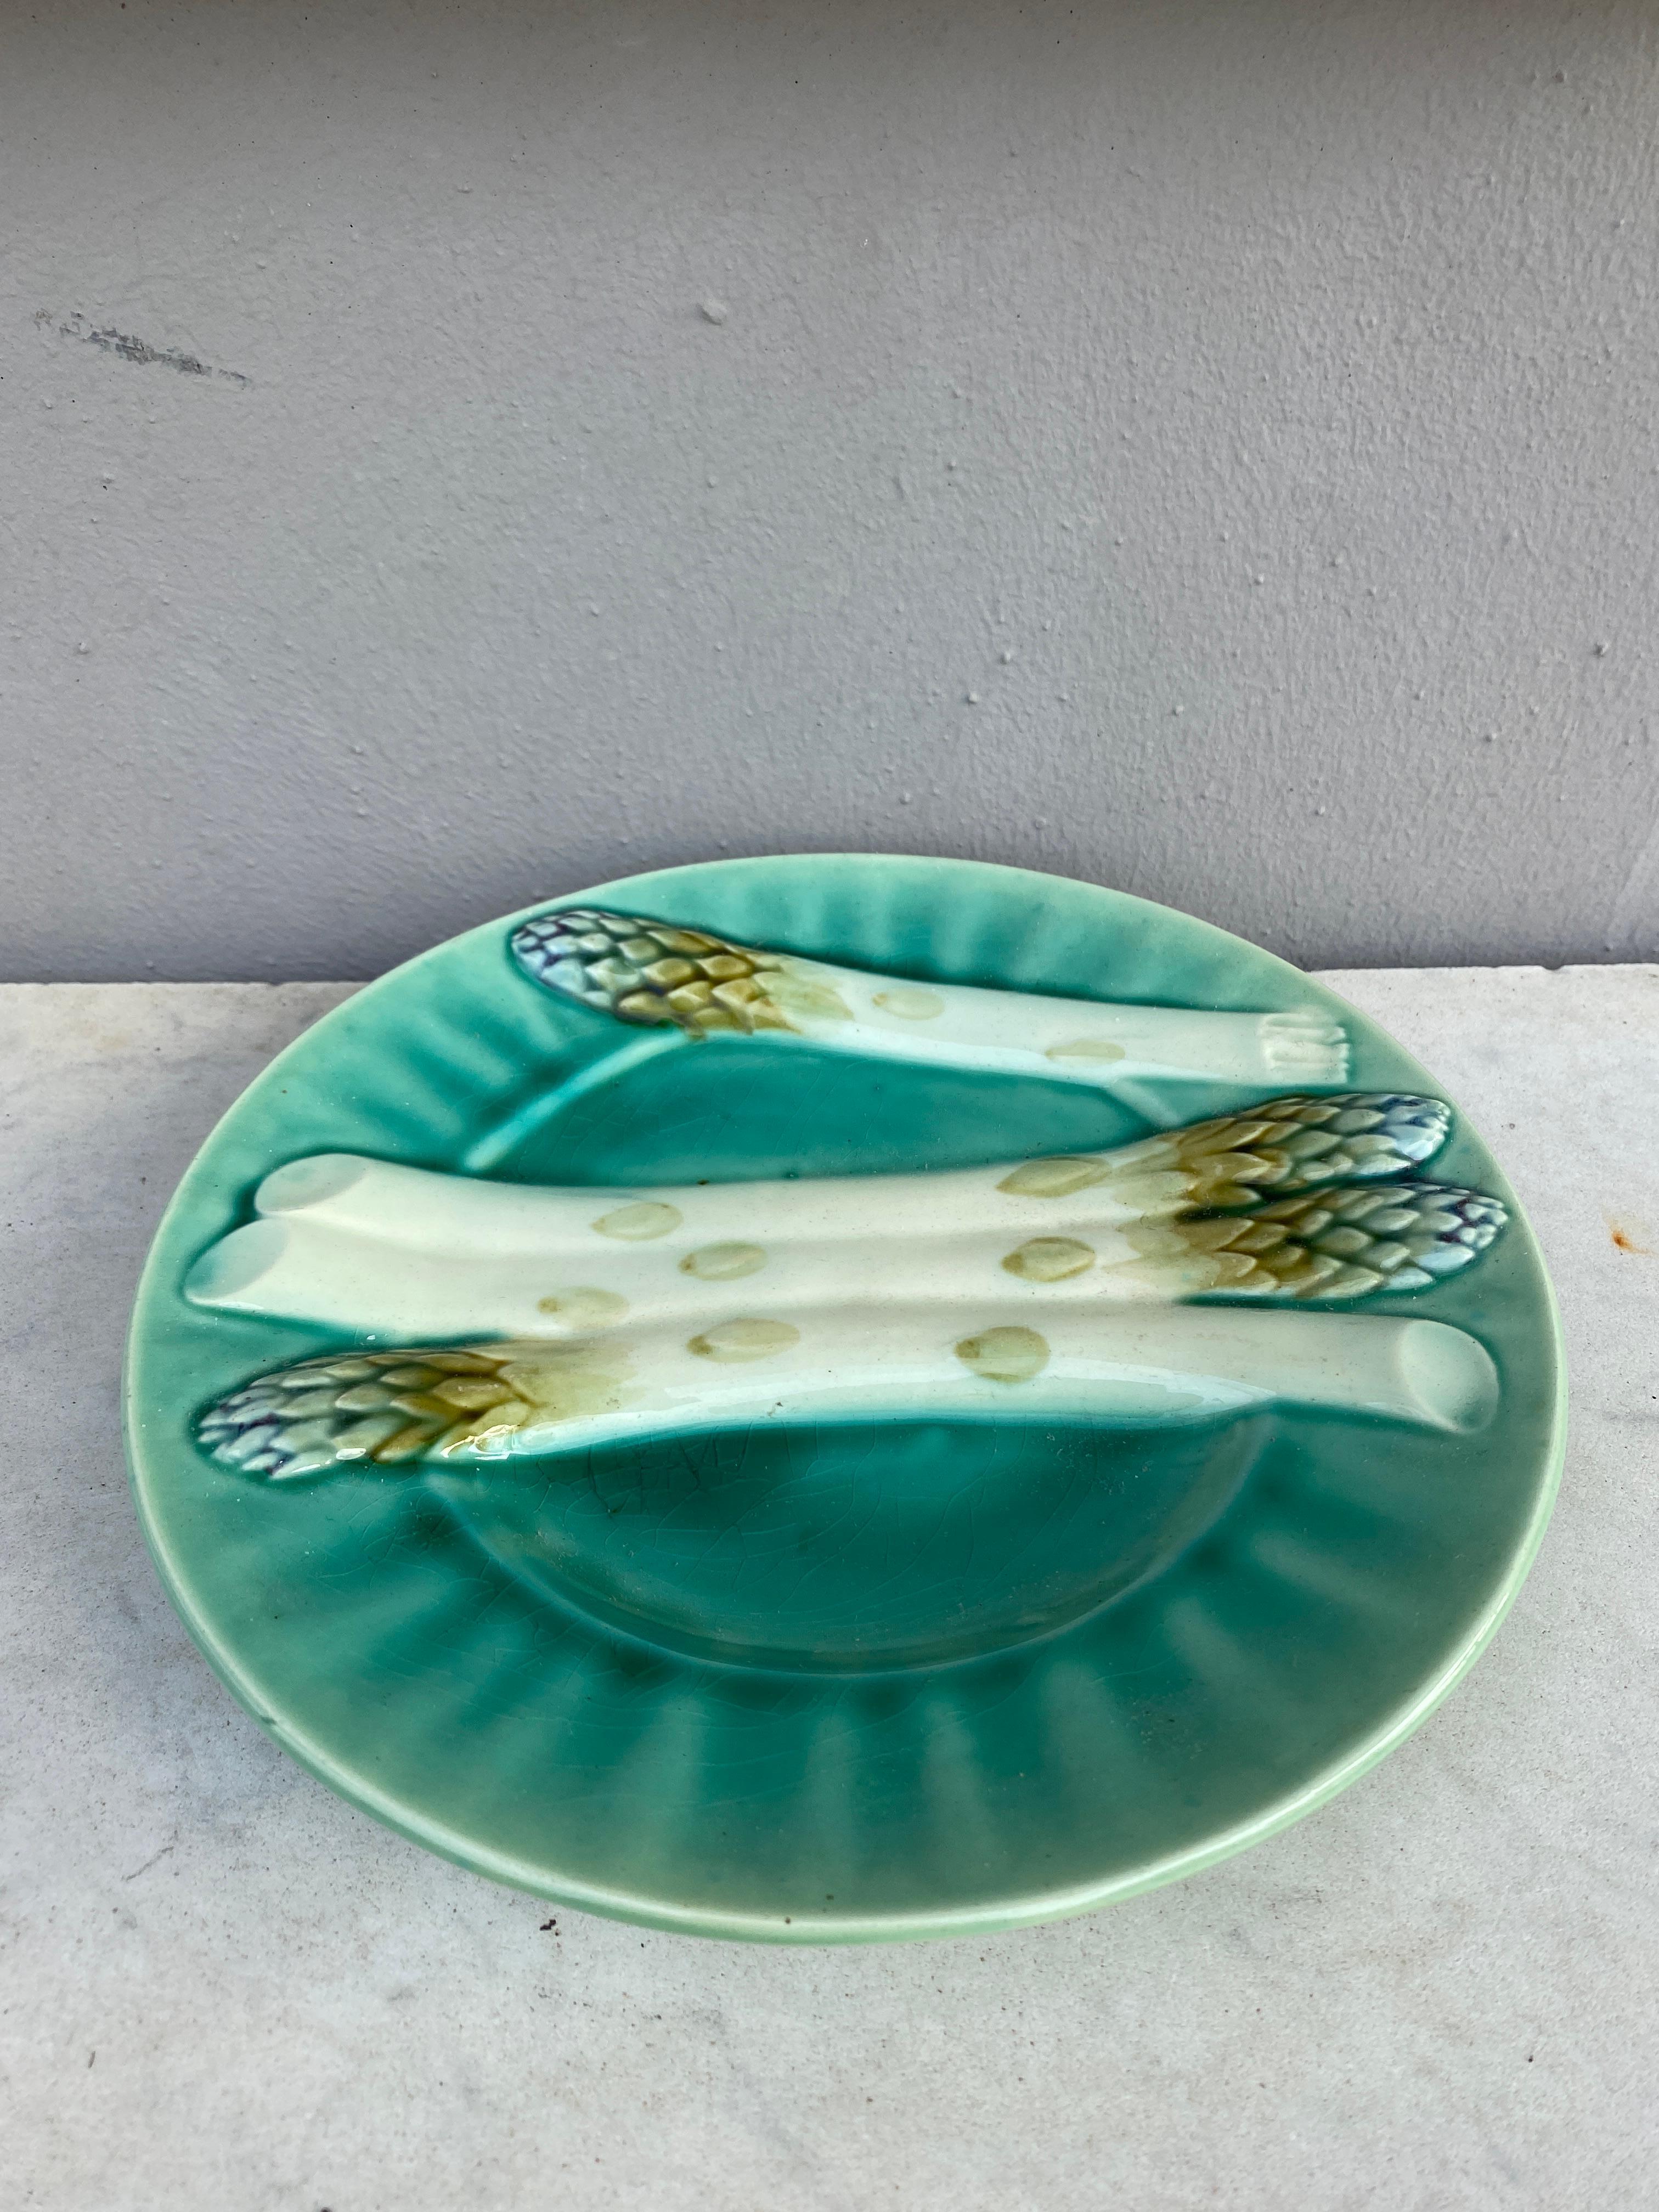 Rustic French Majolica Asparagus Plate Keller & Guerin Luneville, circa 1890 For Sale